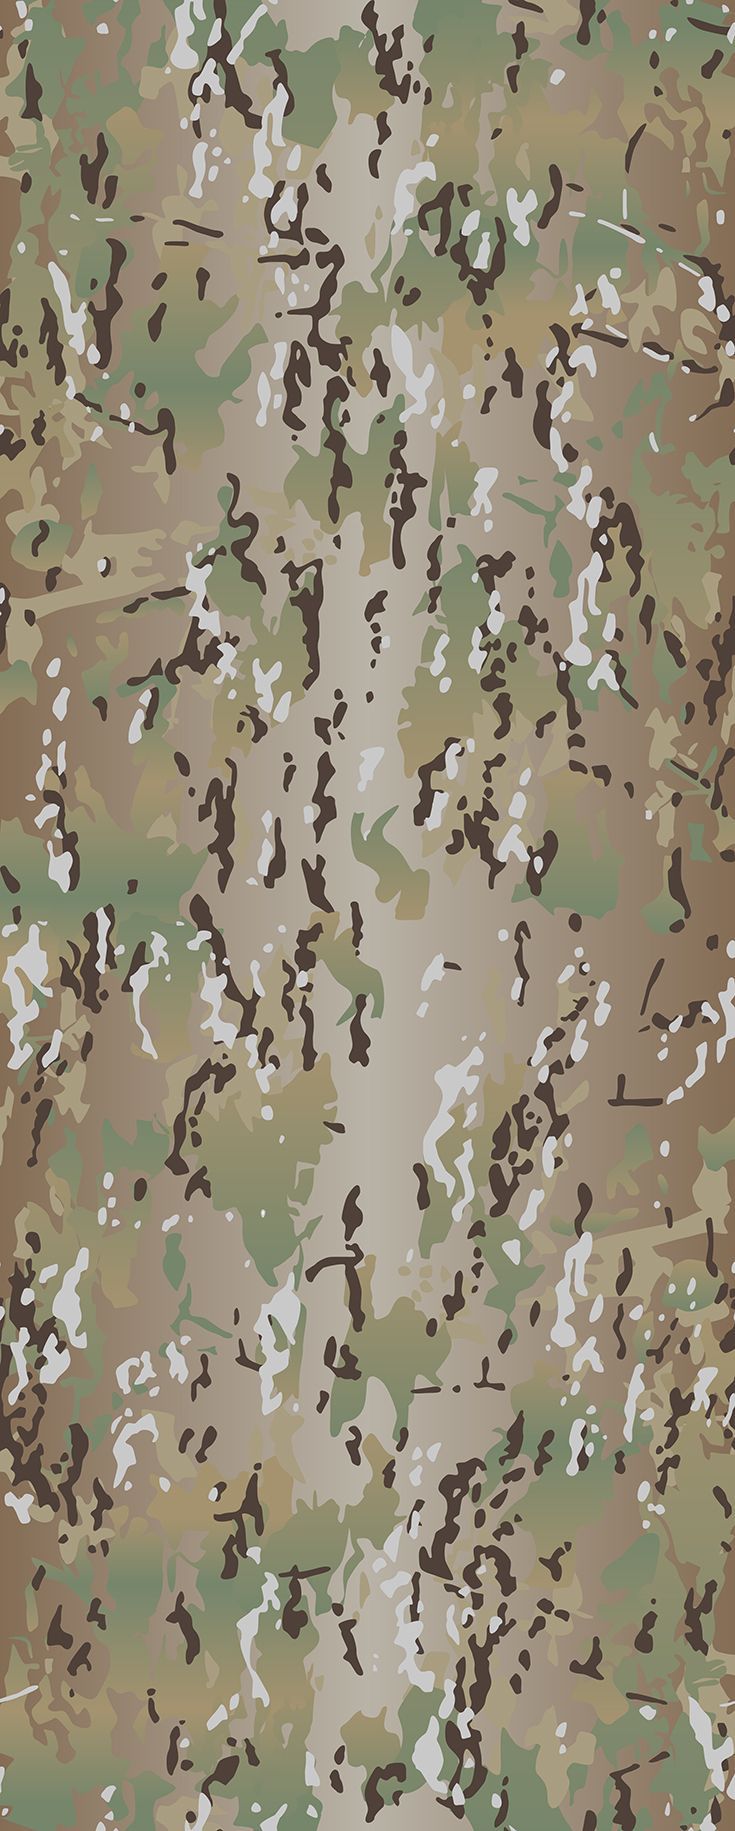 OCP Original vector camouflage pattern for printing, scorpion, army, uniform, print, texture, military camo, MTP, woodland, forest. Camo wallpaper, Military wallpaper, Camouflage pattern